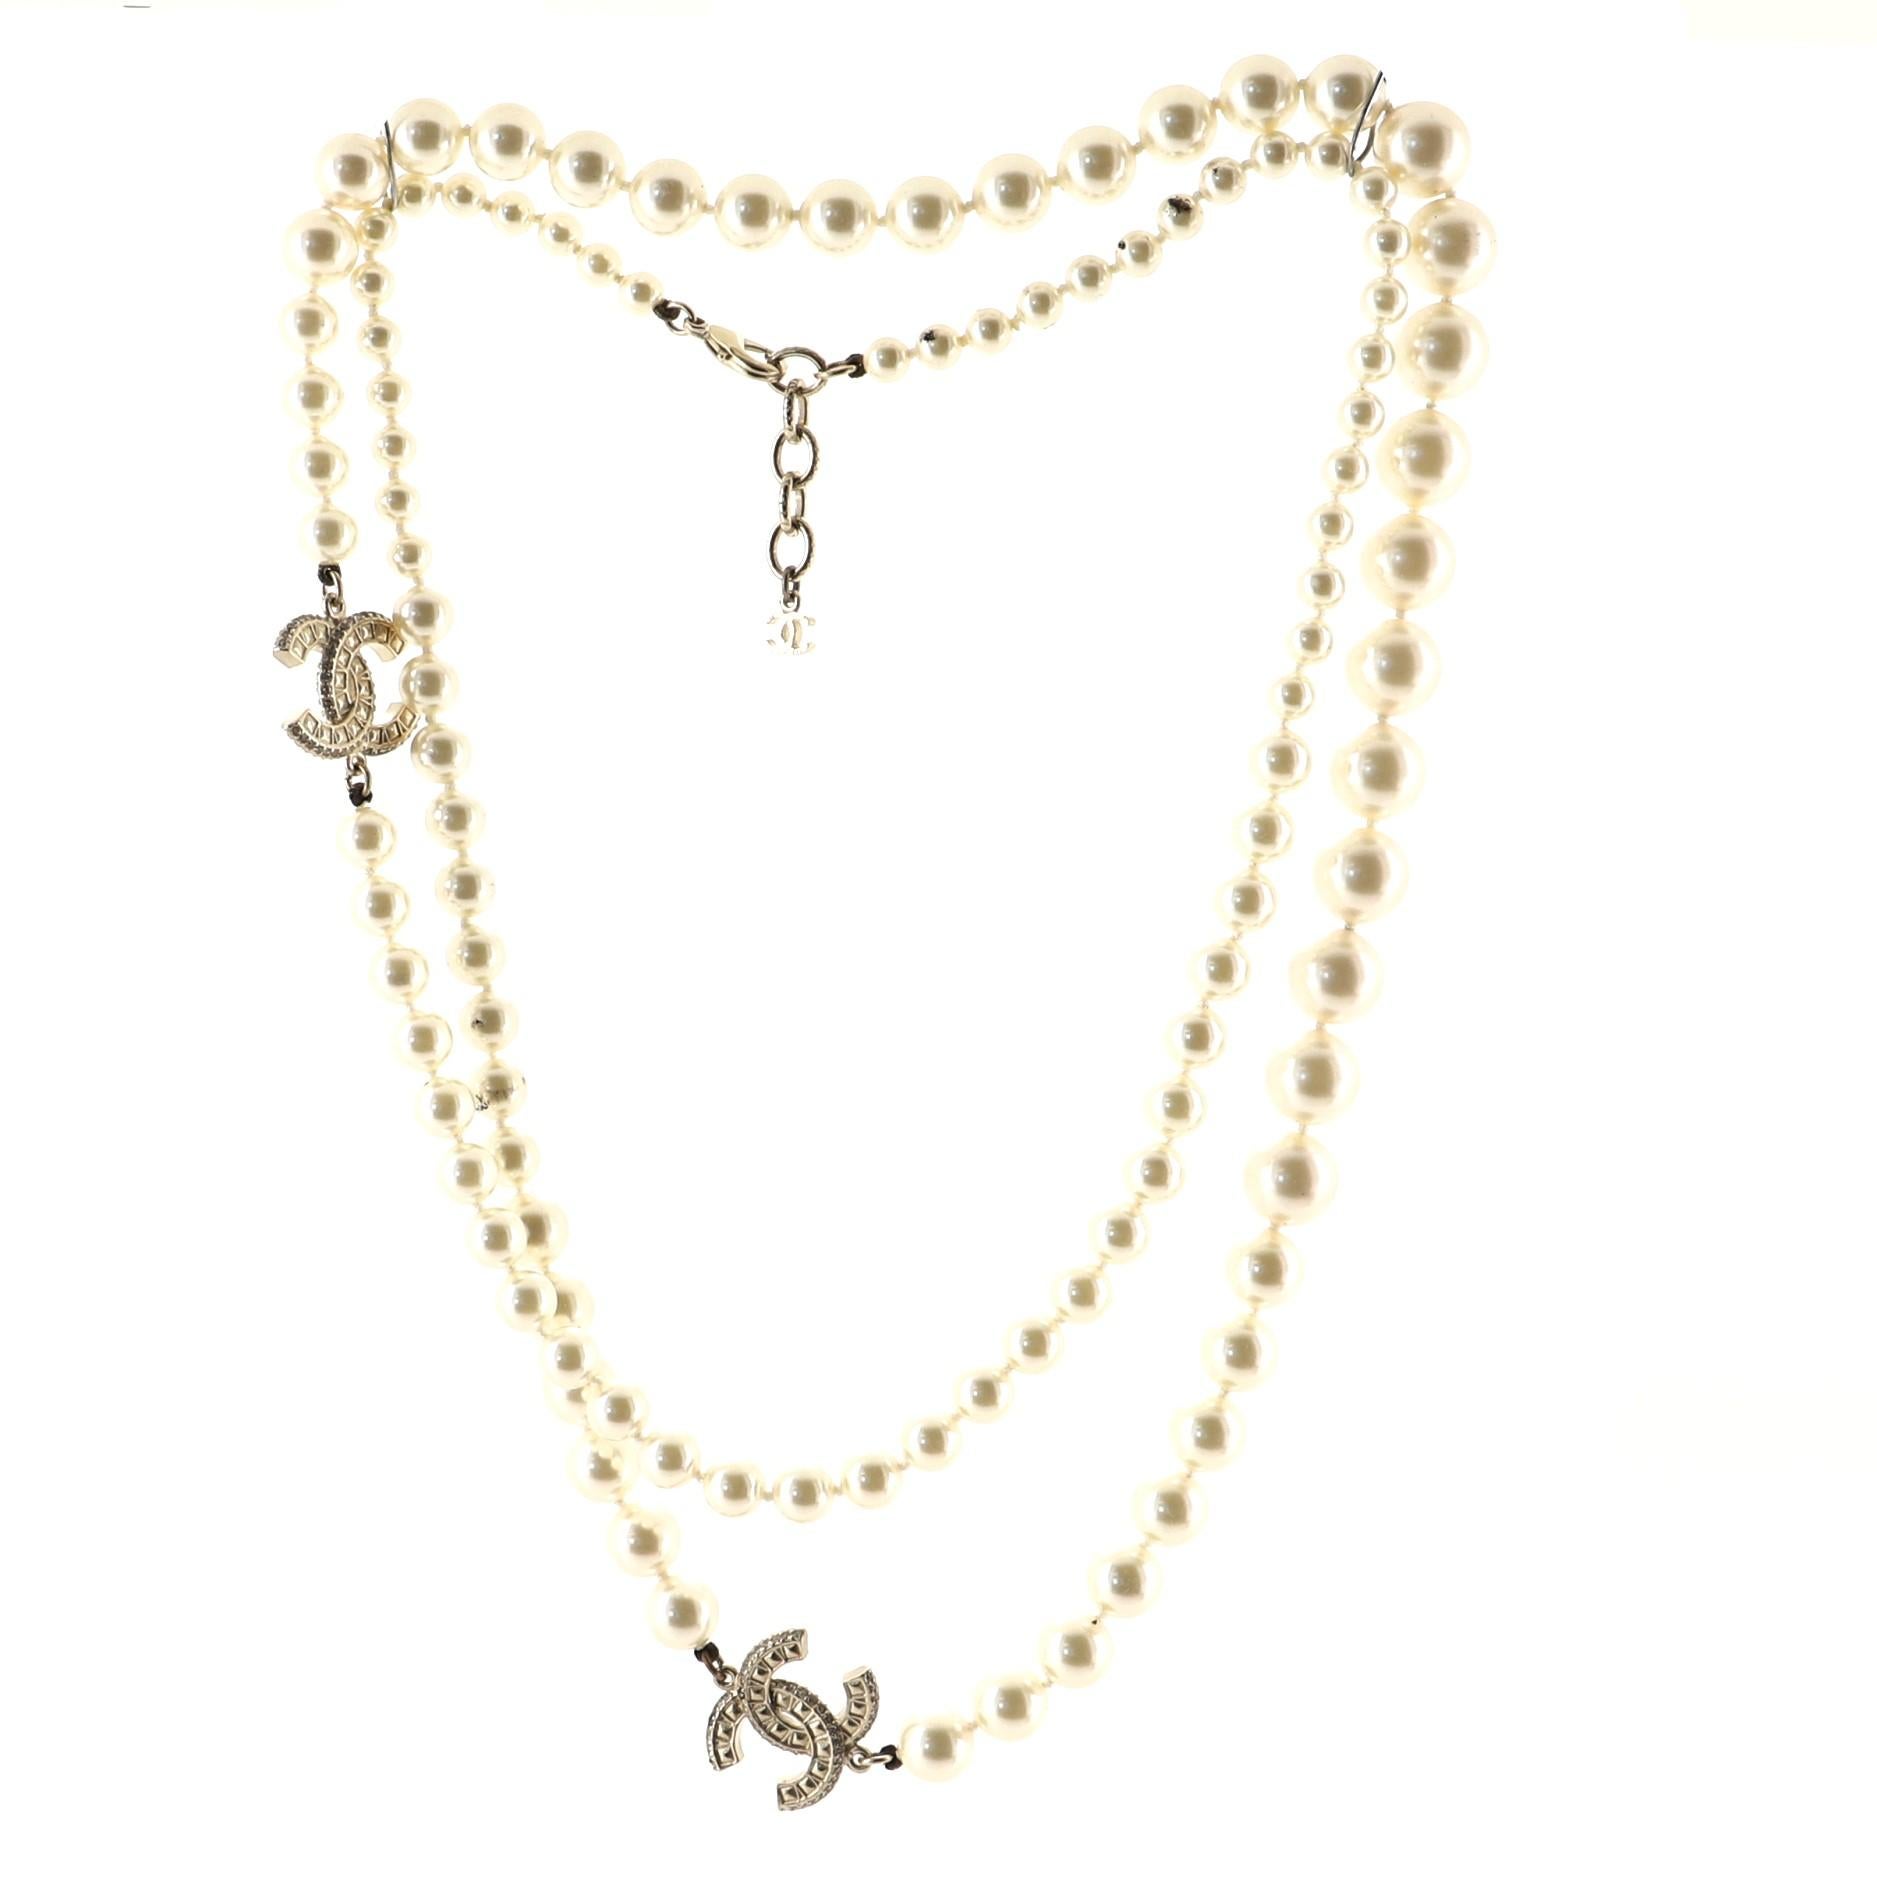 faux chanel pearl necklace